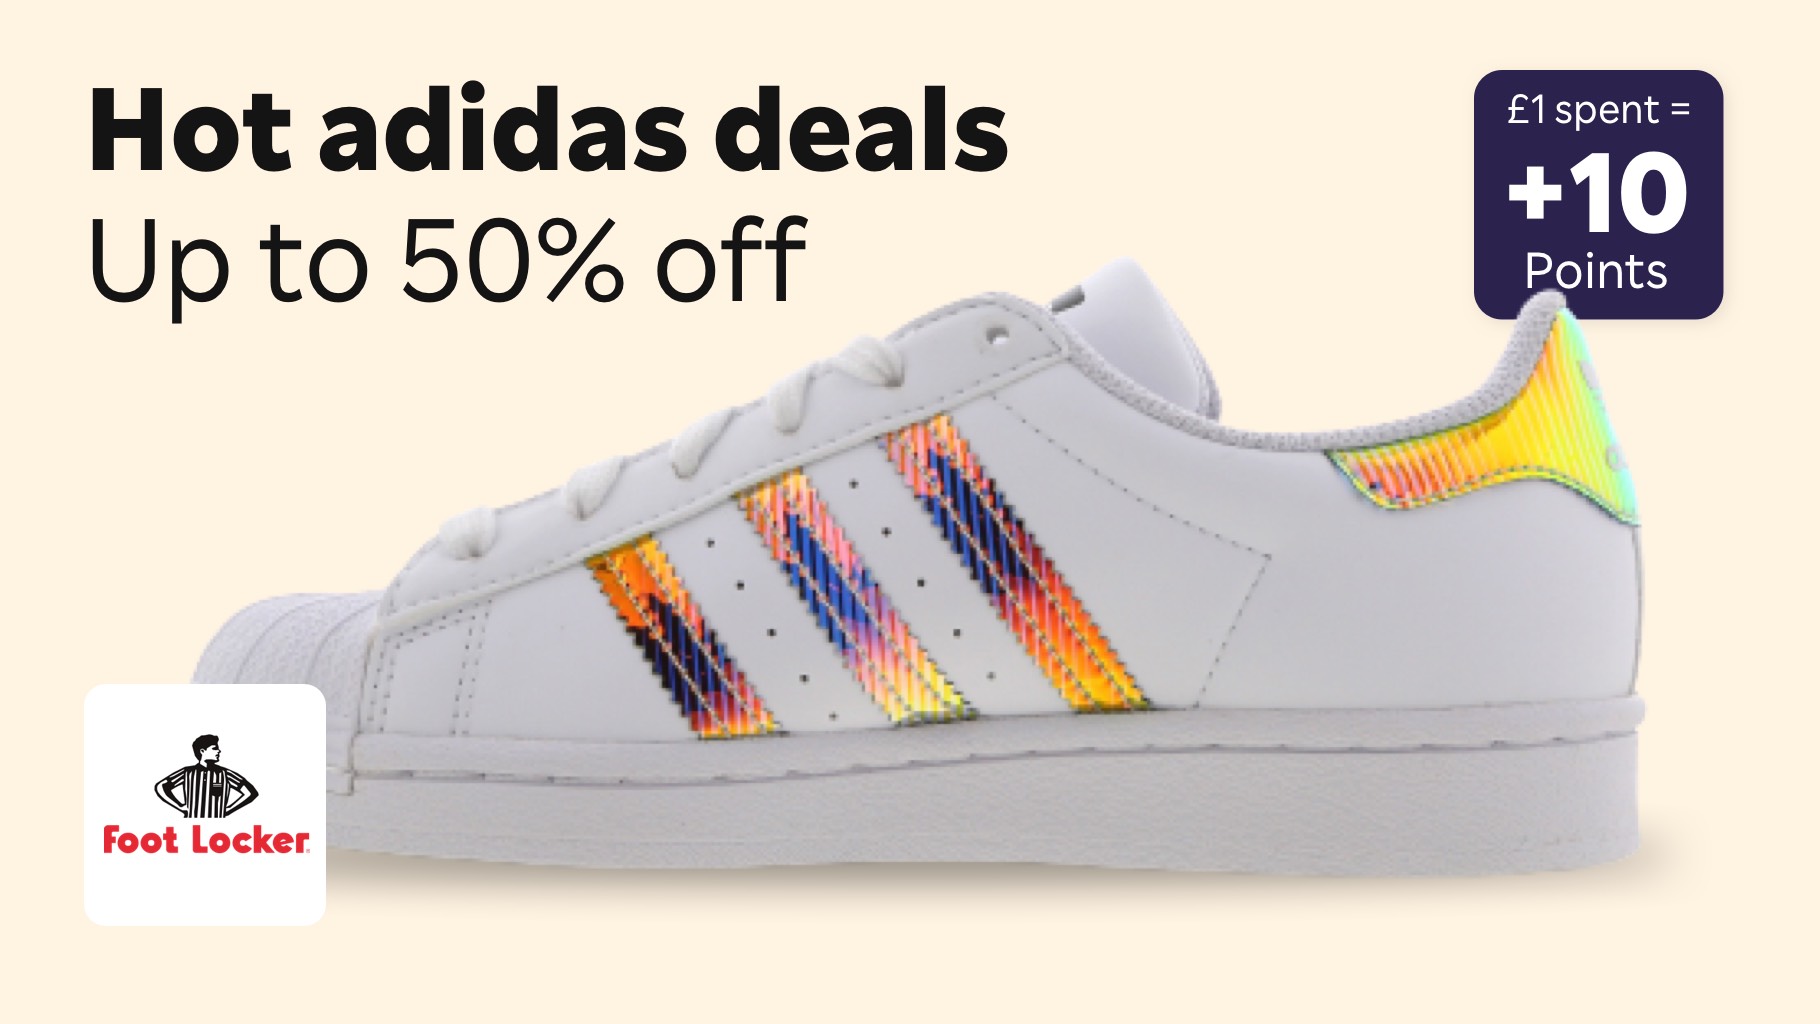 Rakuten on Twitter: "Fresh Sale Deals: Up to 50% off on your favourite Adidas. Shop now and earn 10 Points for every £1 you spend.⠀ https://t.co/pGINevb6zg .⠀ .⠀ #ClubRakuten #Rakuten #FootLocker #